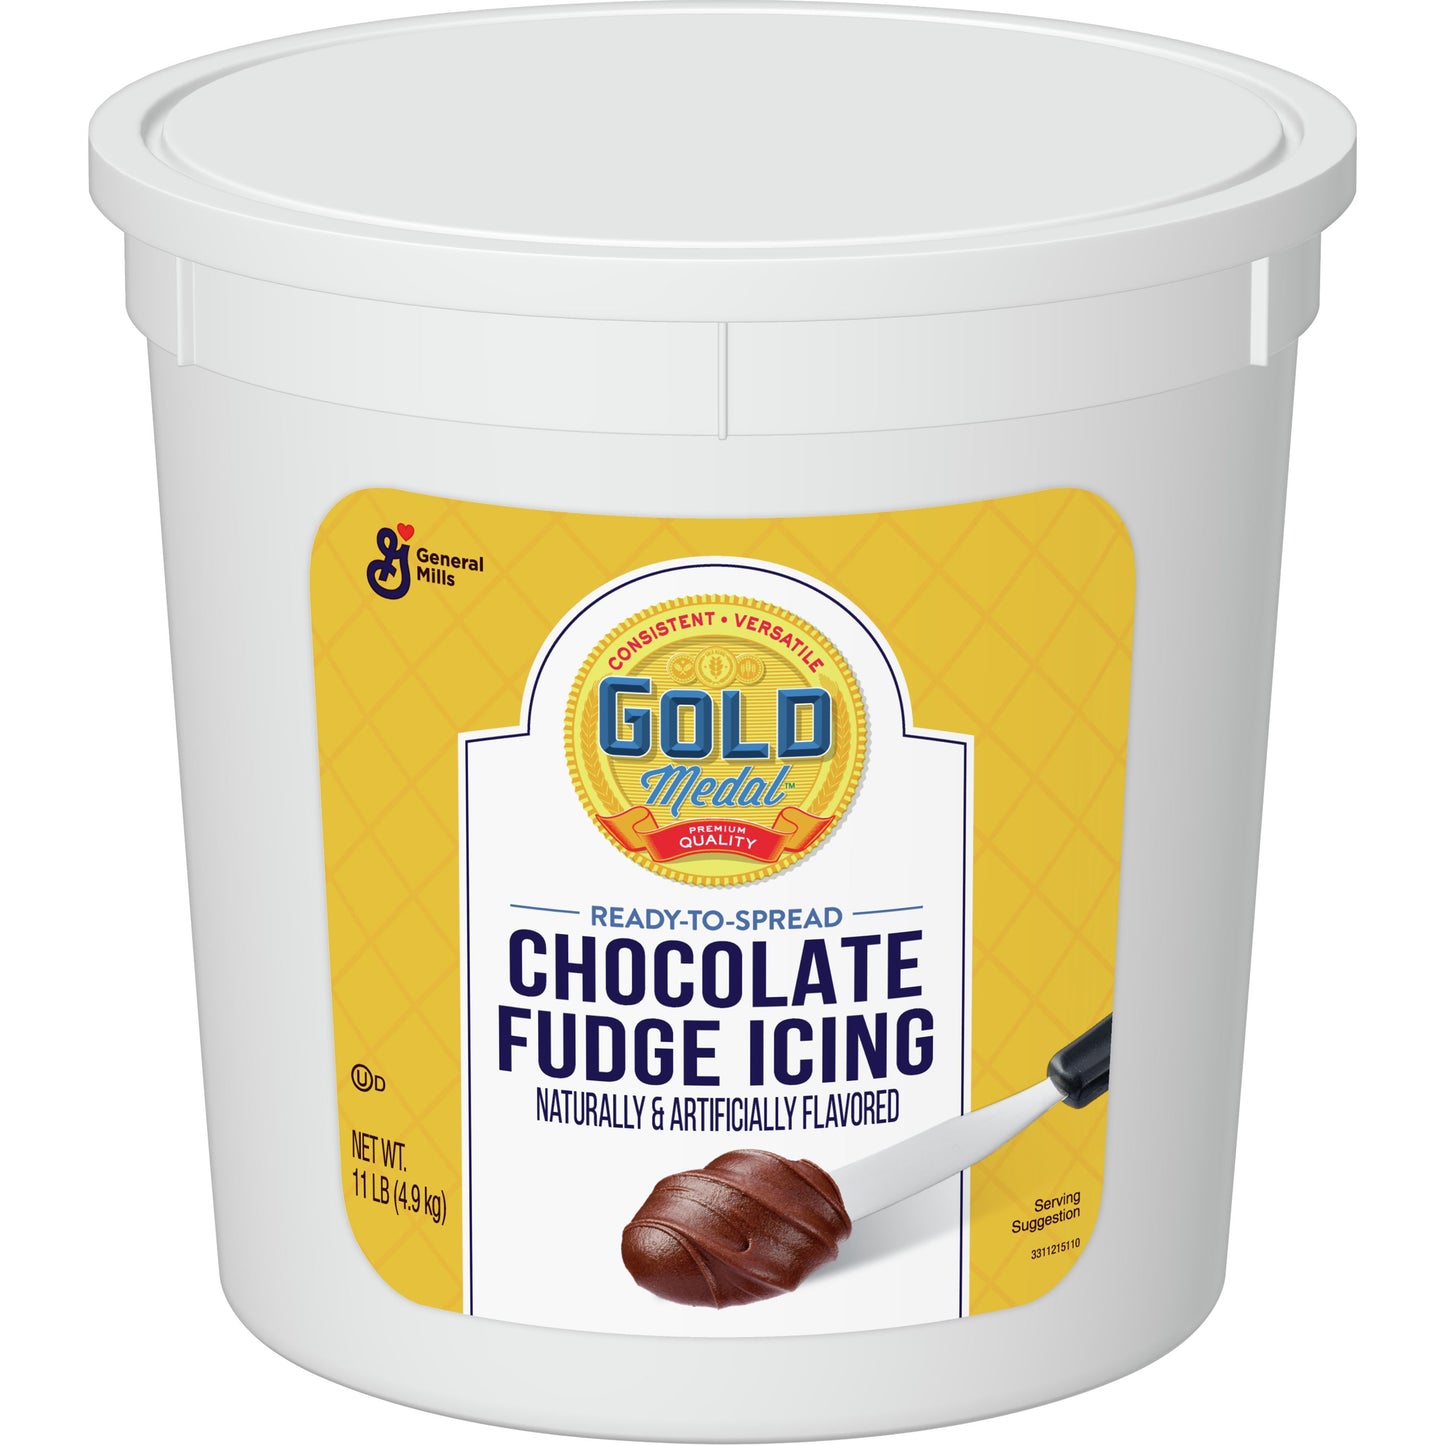 Gold Medal Ready-to-Spread Chocolate Creme Icing 11 lb.